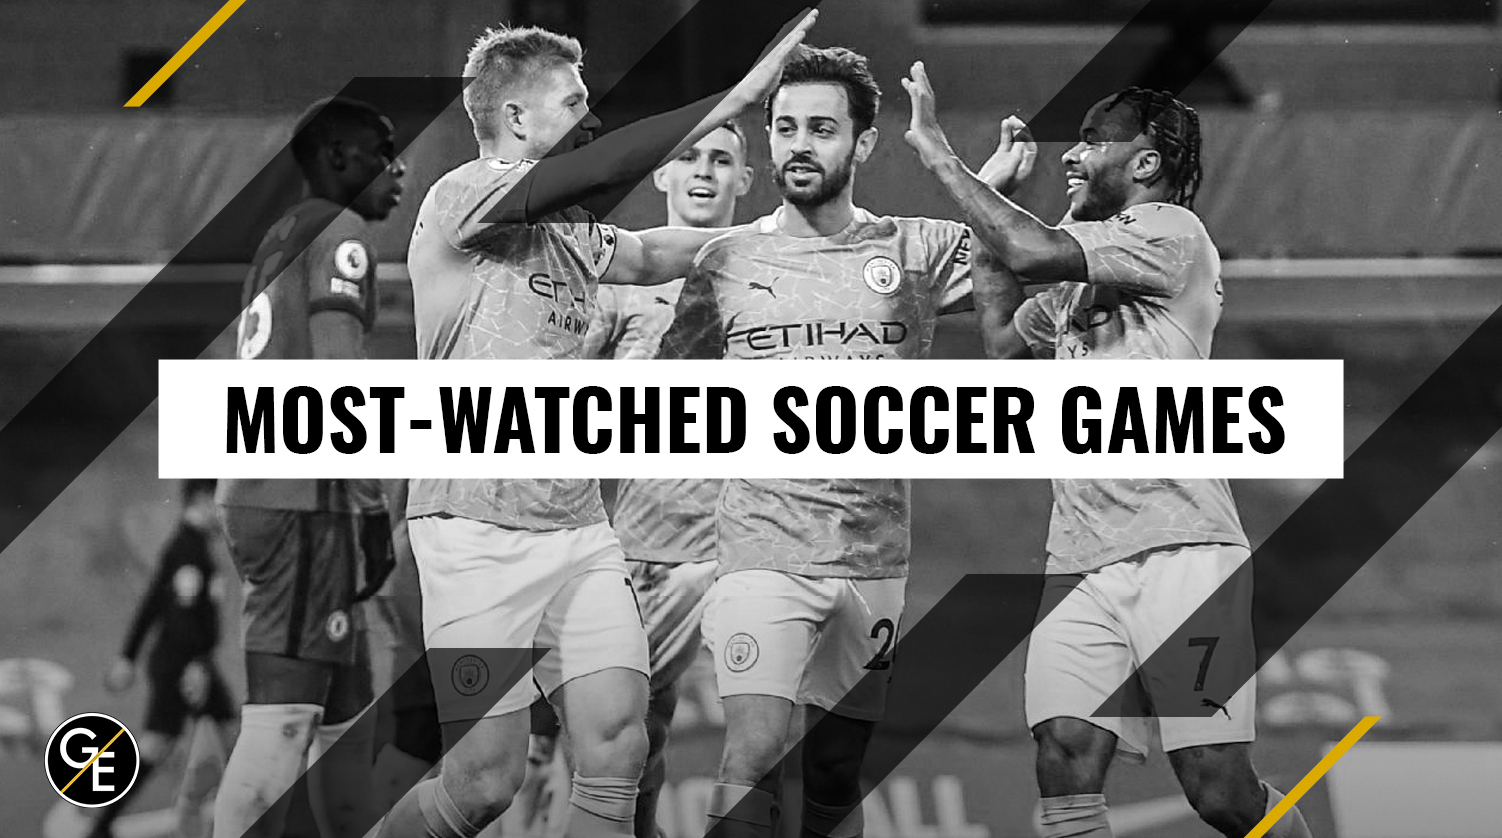 Most-watched soccer games